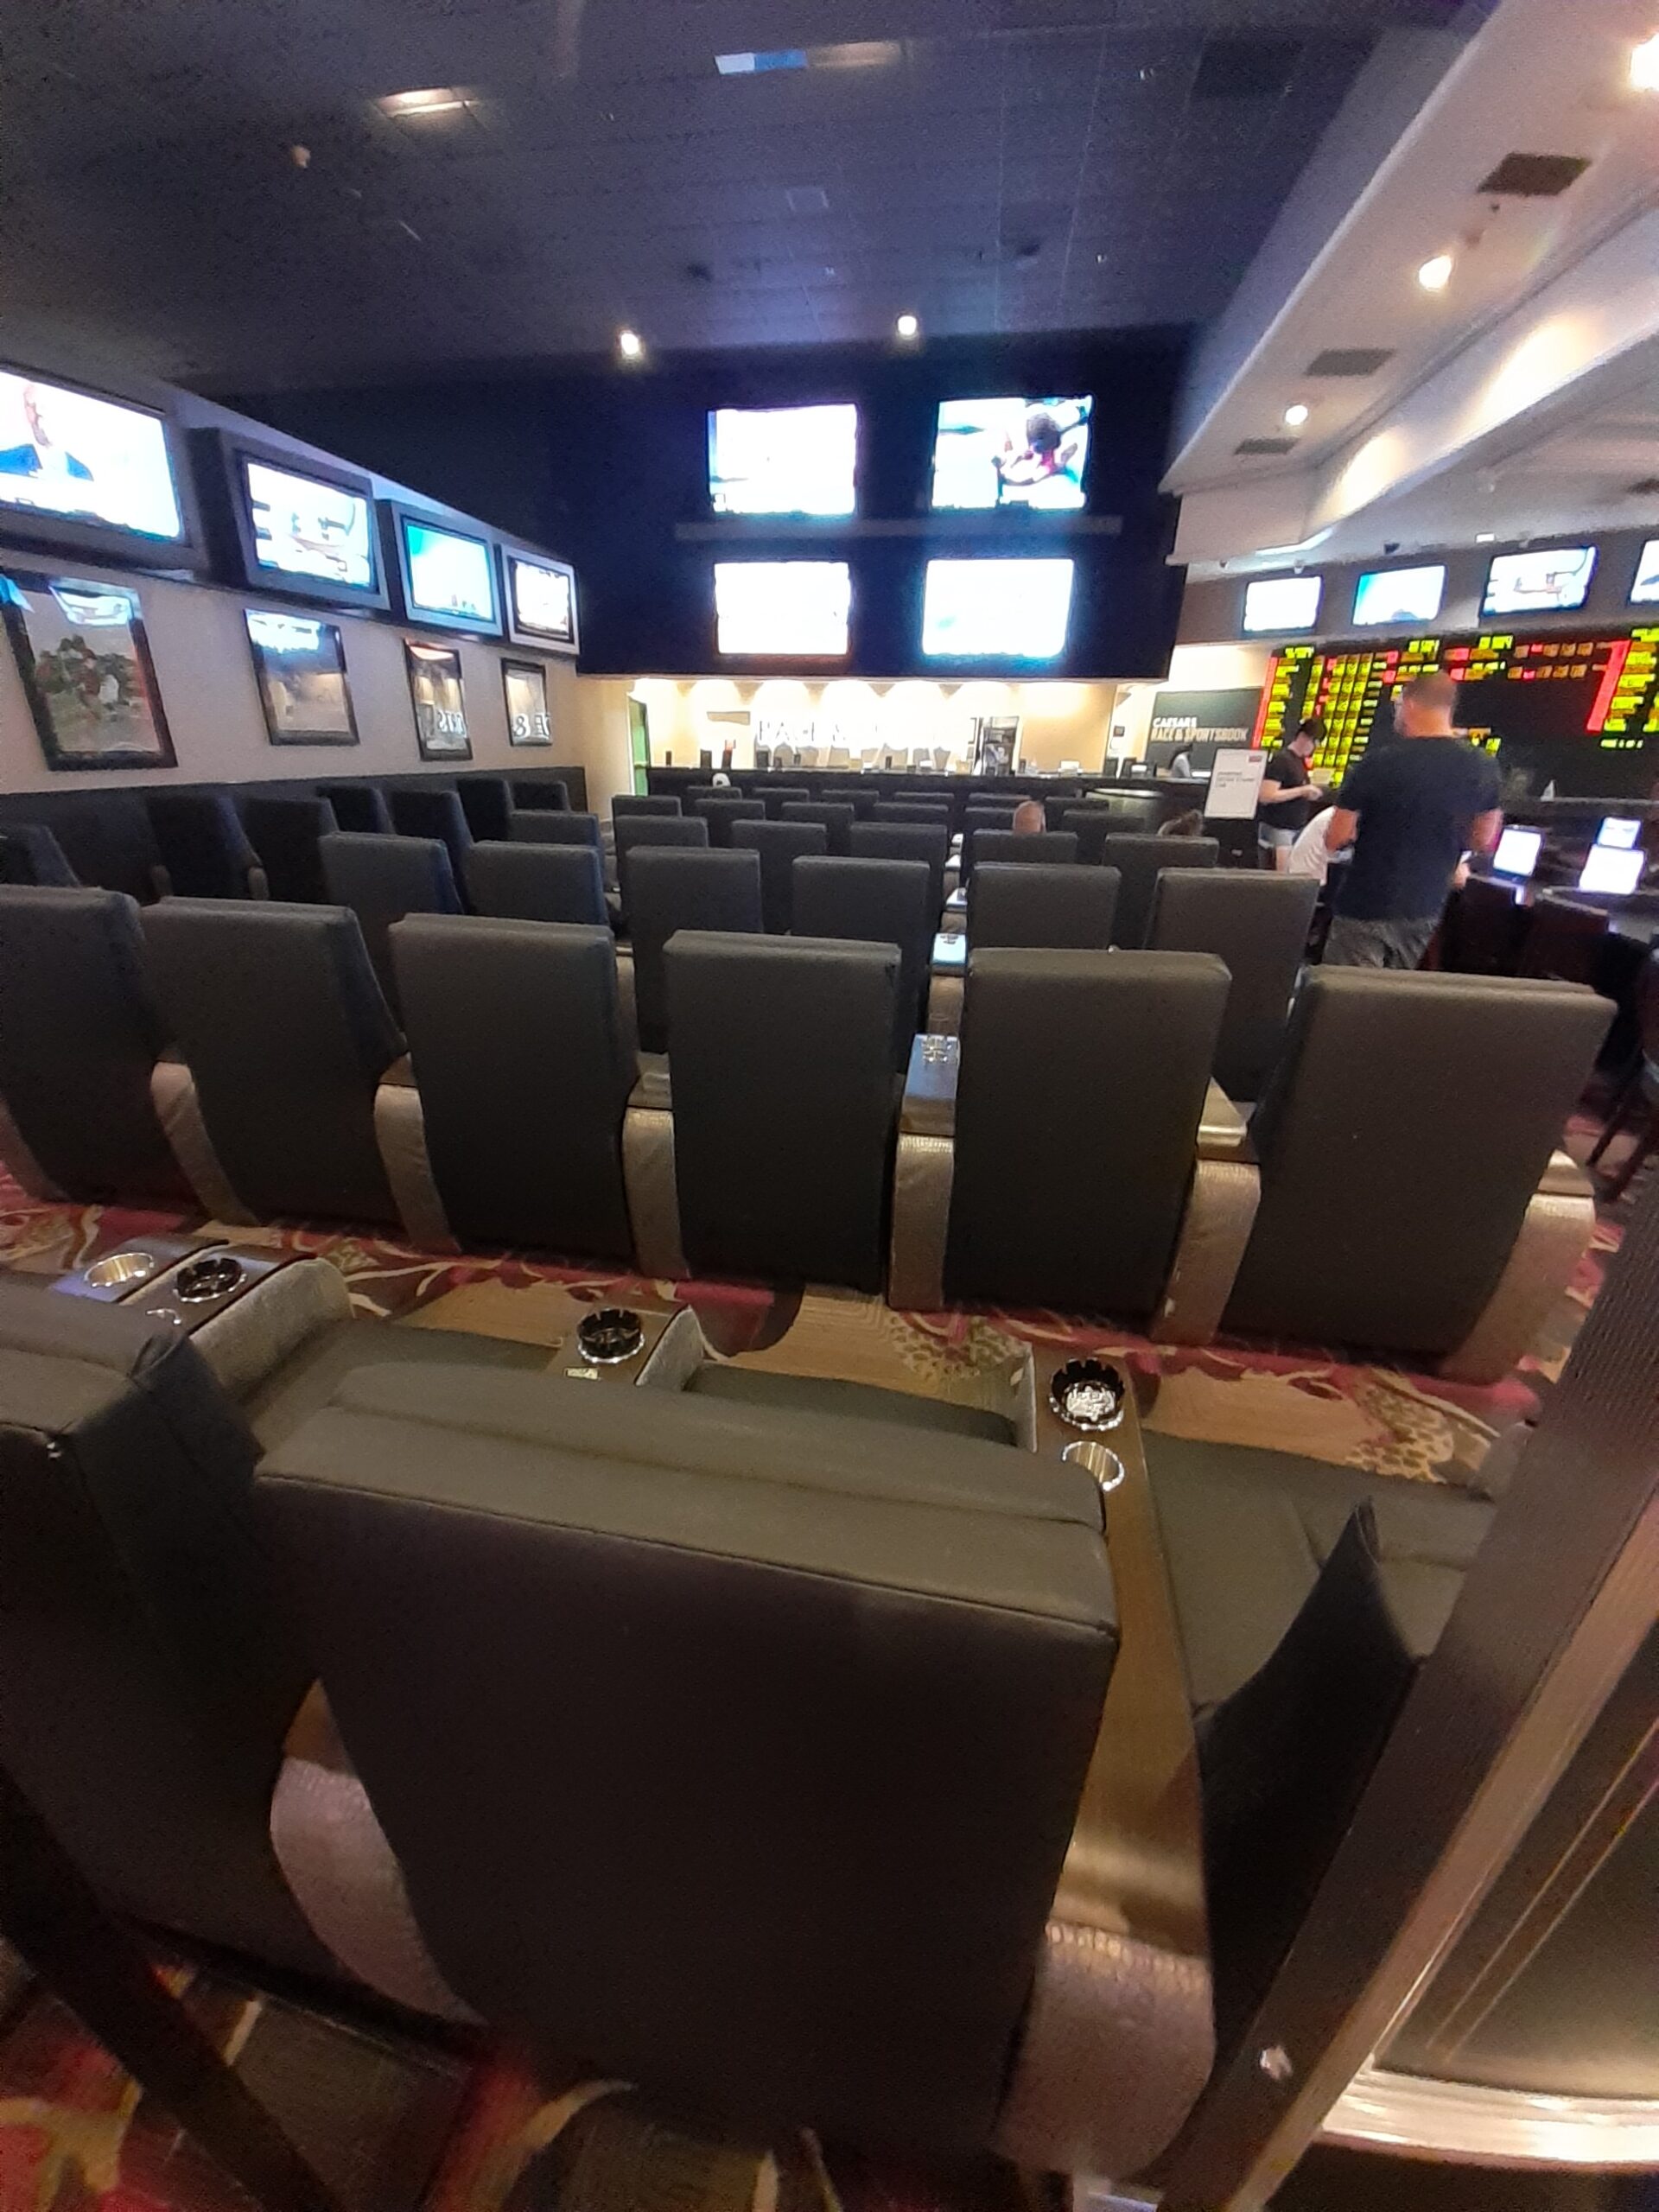 Flamingo Chairs - Sportsbook Review - Square Bettor